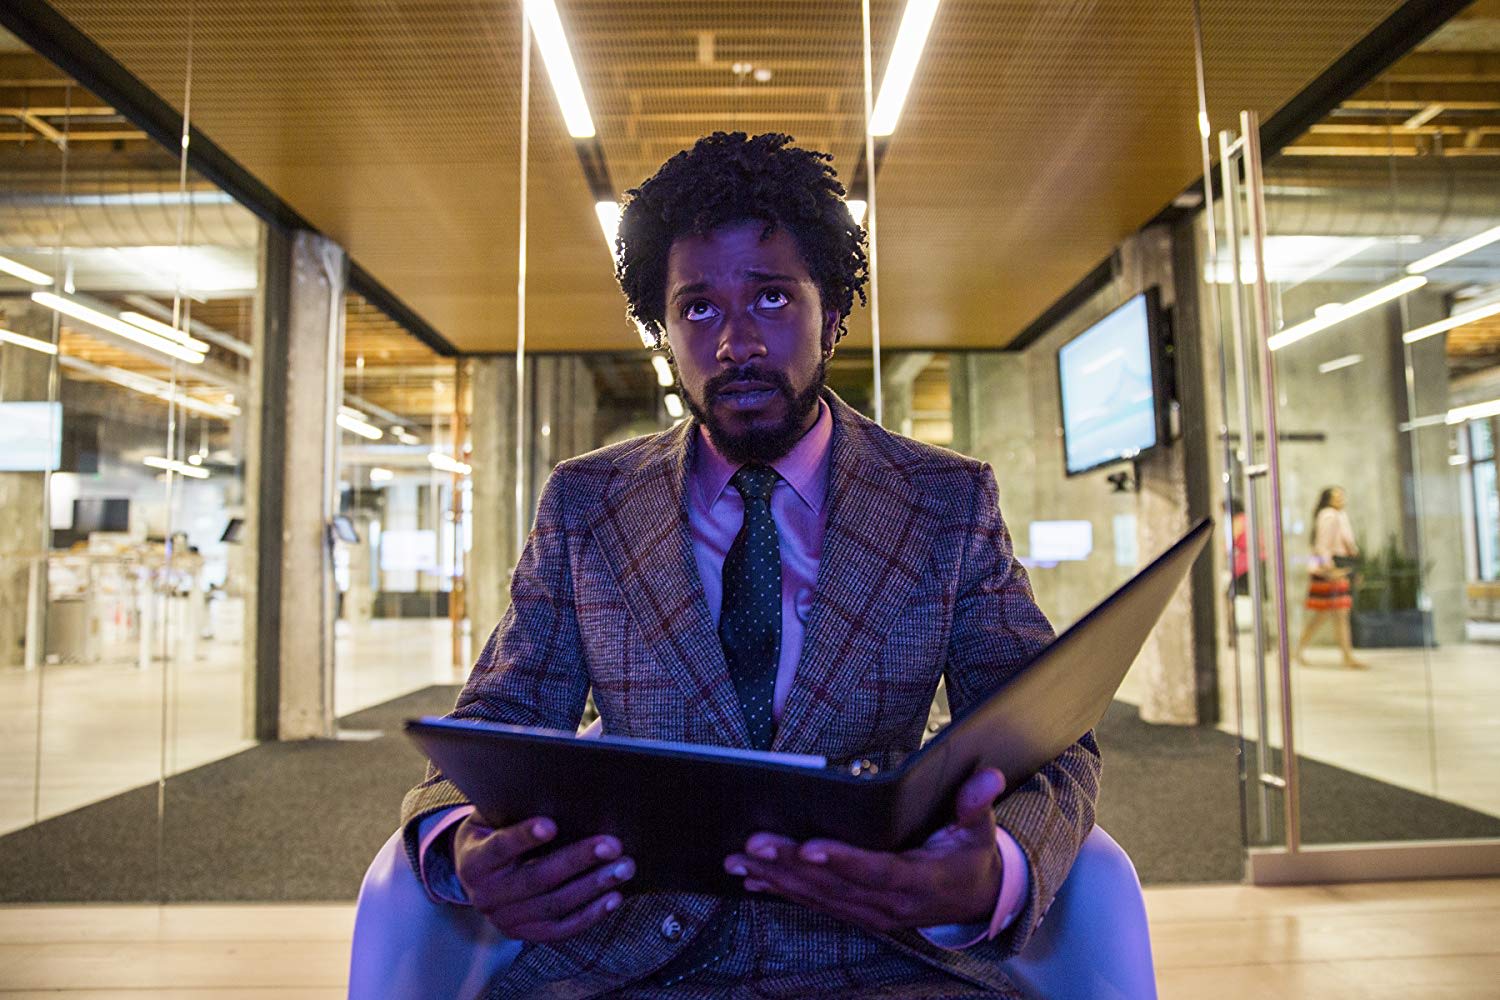 Actor Lakeith Stanfeld wears a plaid suit jacket and polka dot tie while holding open a binder and sitting outside of an office building in the film "Sorry to Bother You."